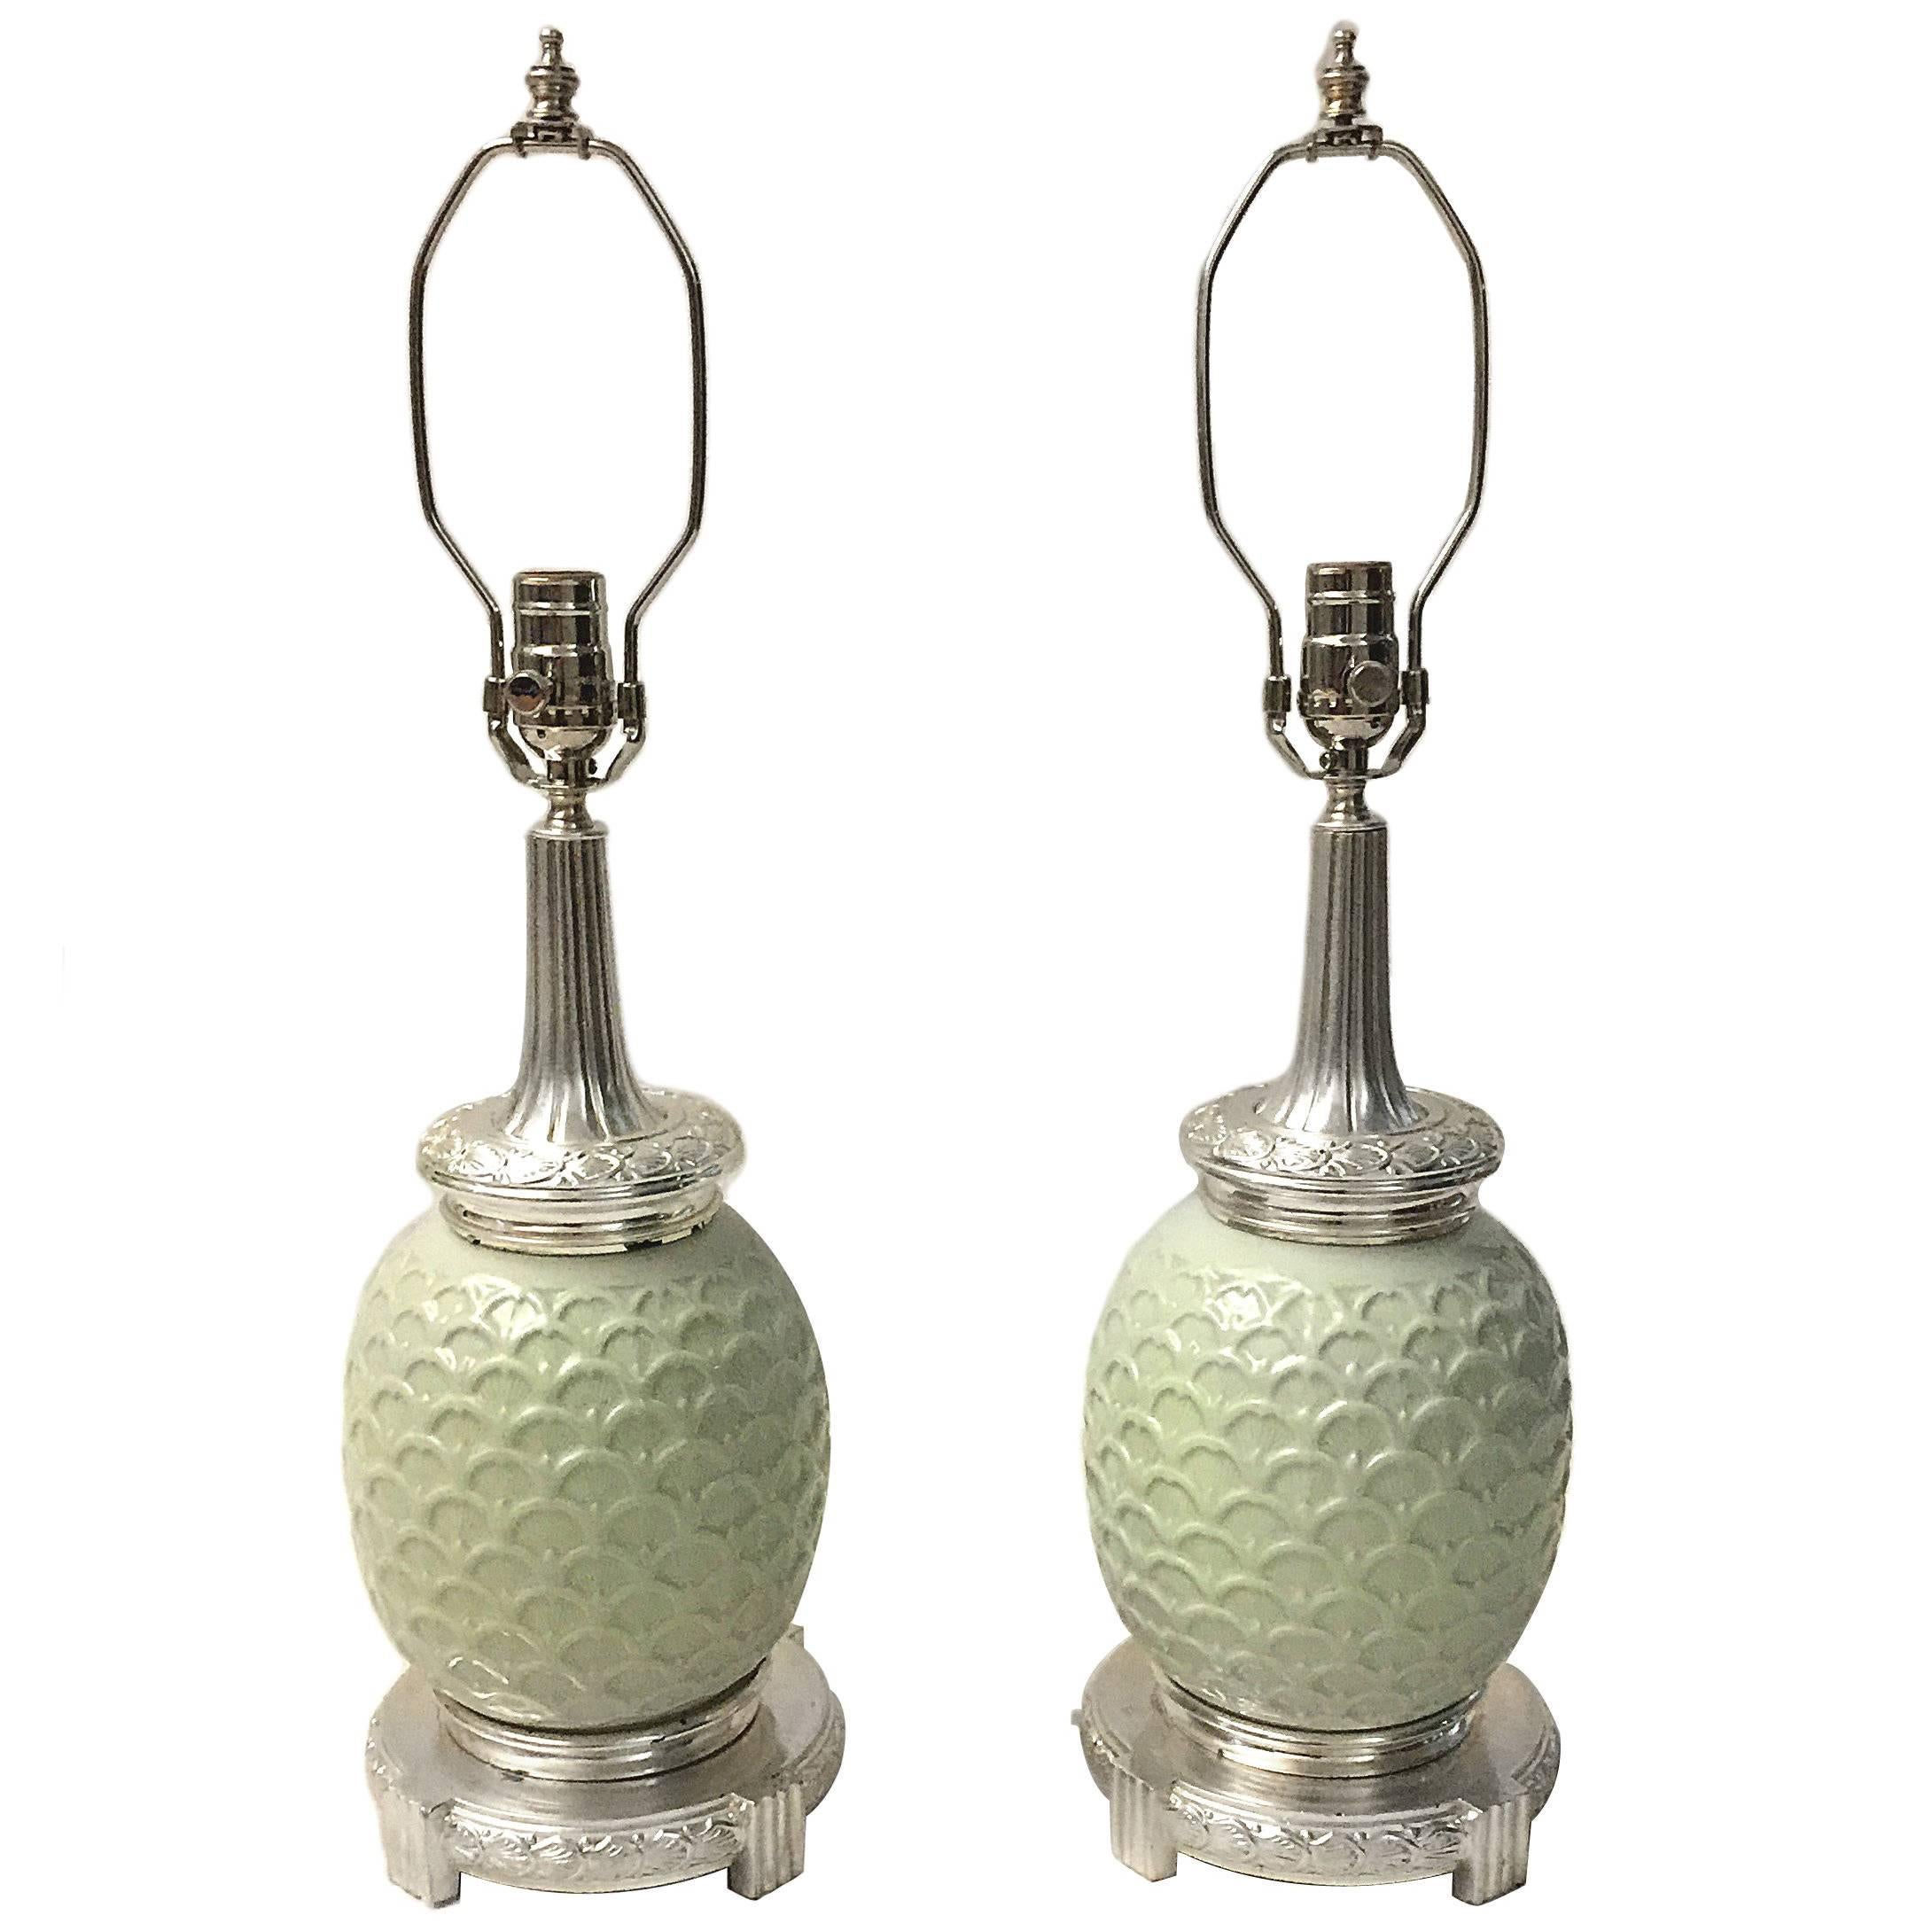 A pair of 1920s French celadon lamps with silver plated mounts.

Measures: 15.5 heigth of body alone.